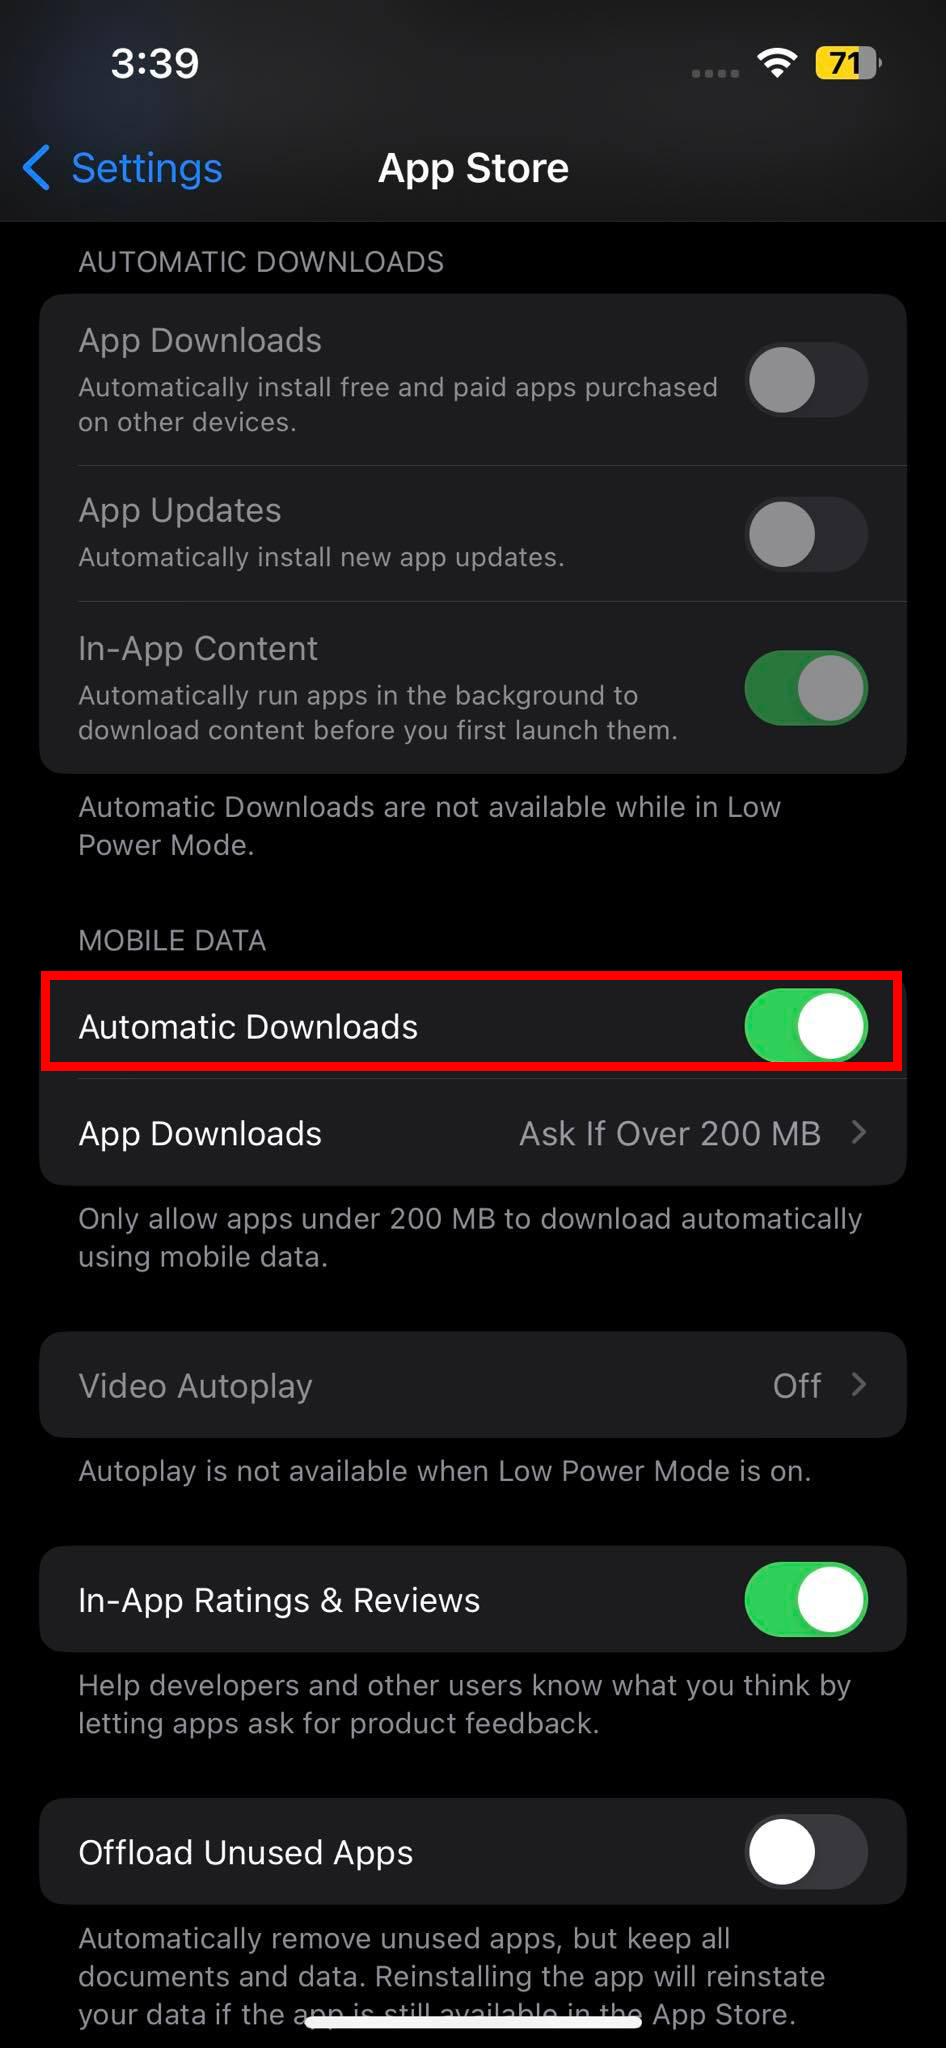 App Store Automatic Downloads